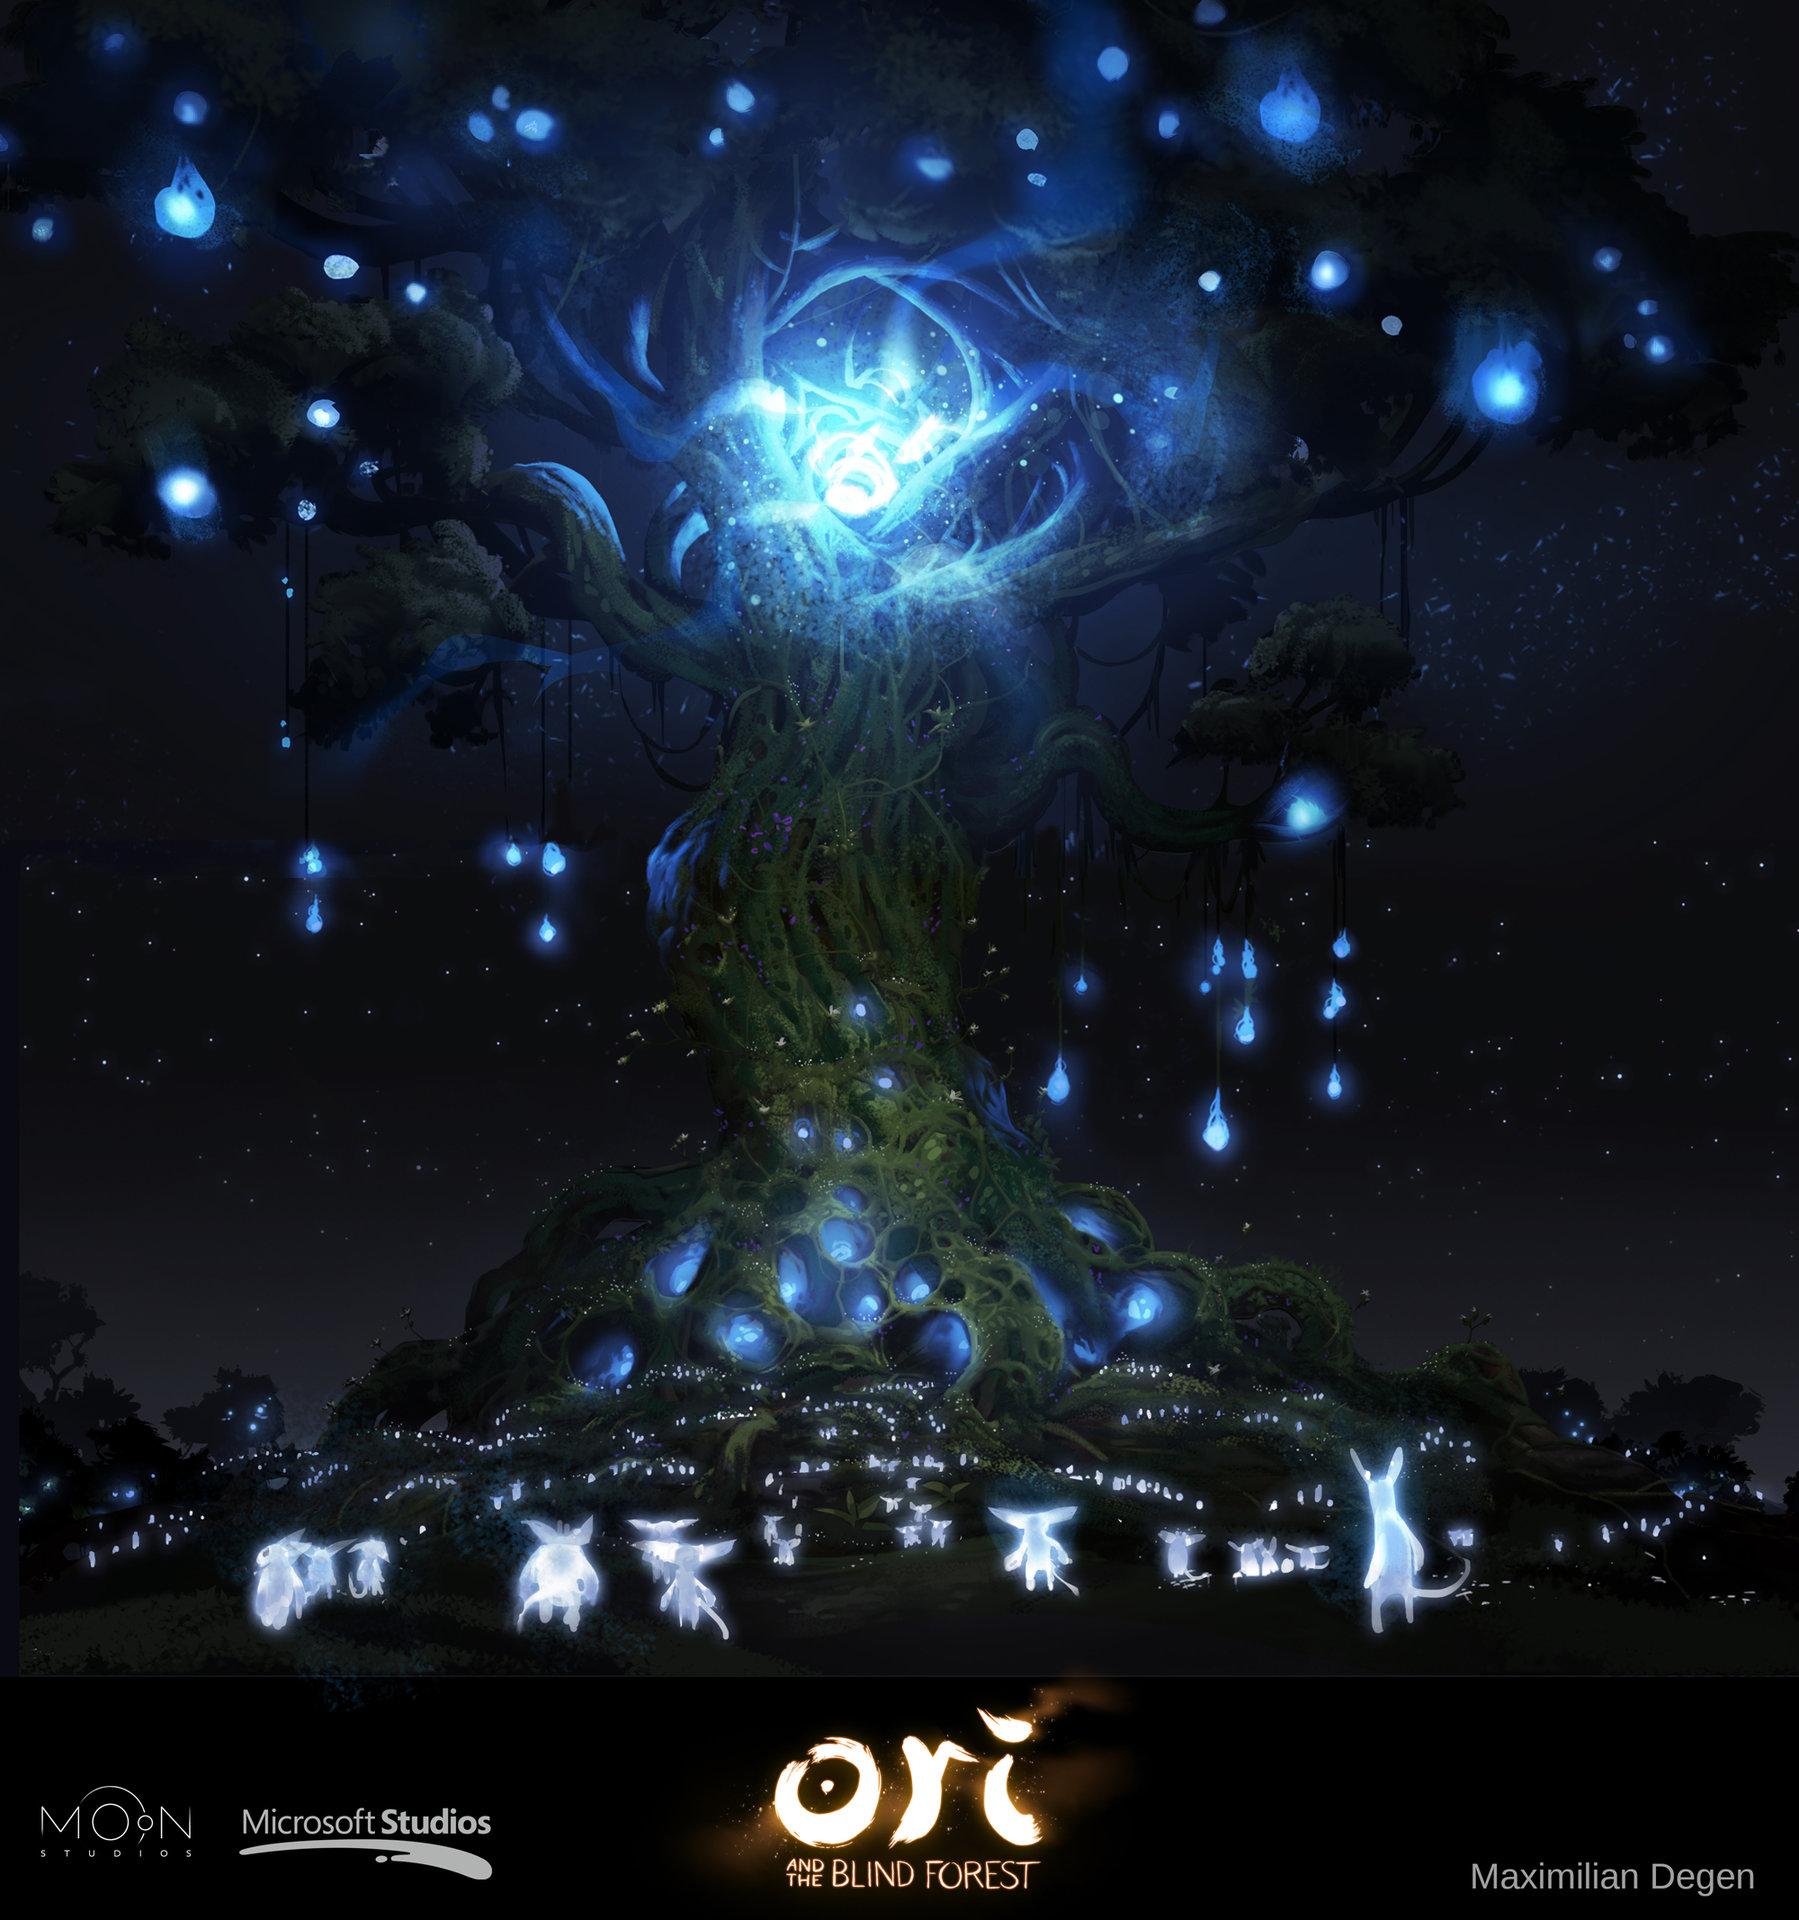 Ori And The Blind Forest And The Blind Forest The Spirit Tree